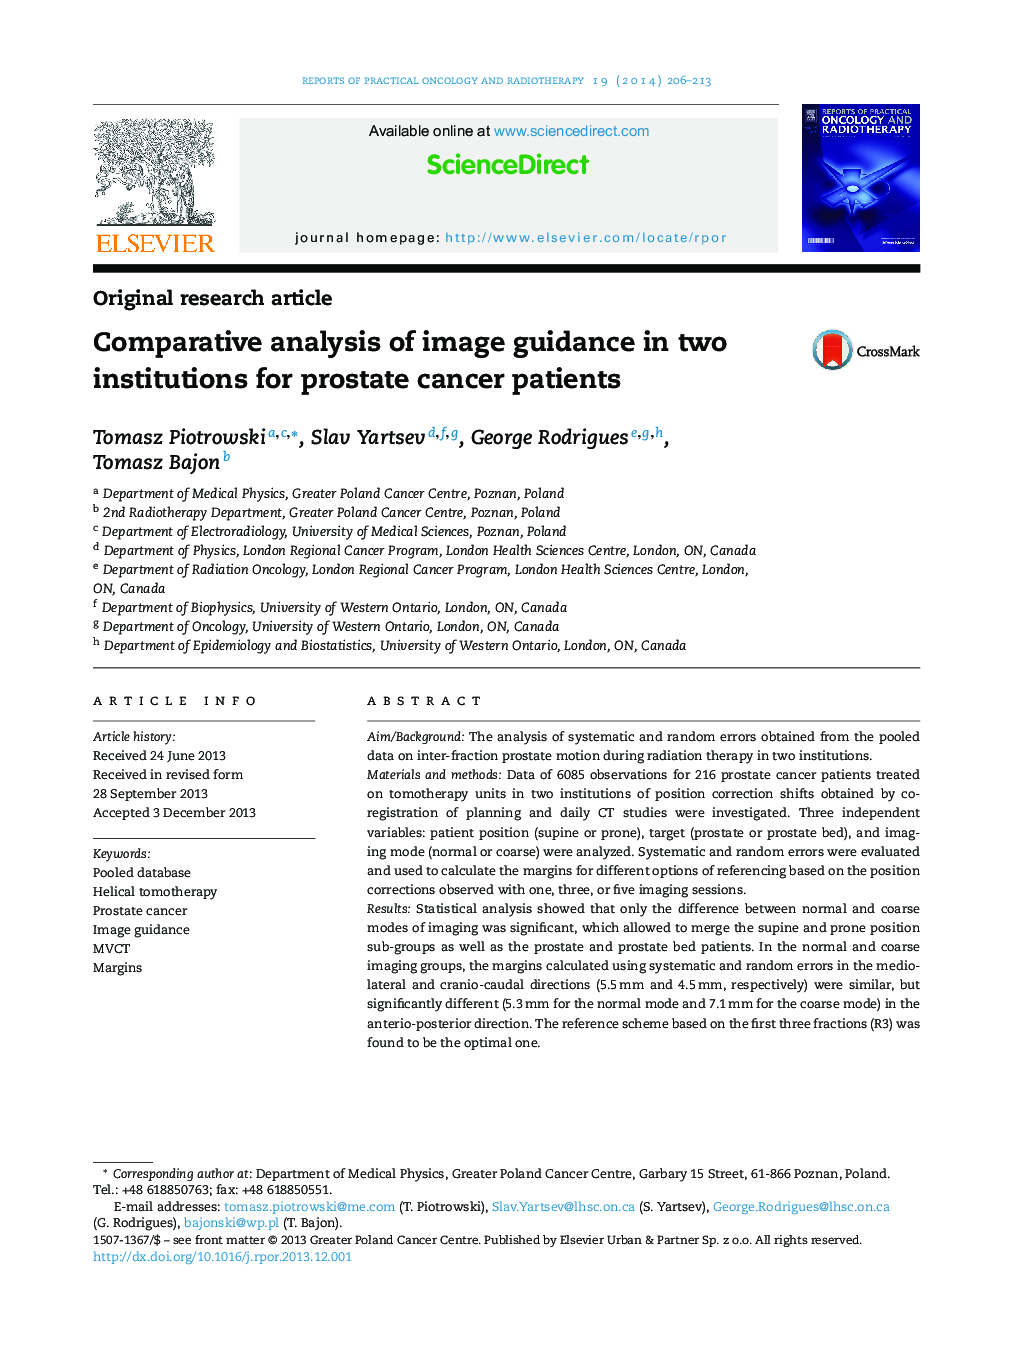 Comparative analysis of image guidance in two institutions for prostate cancer patients